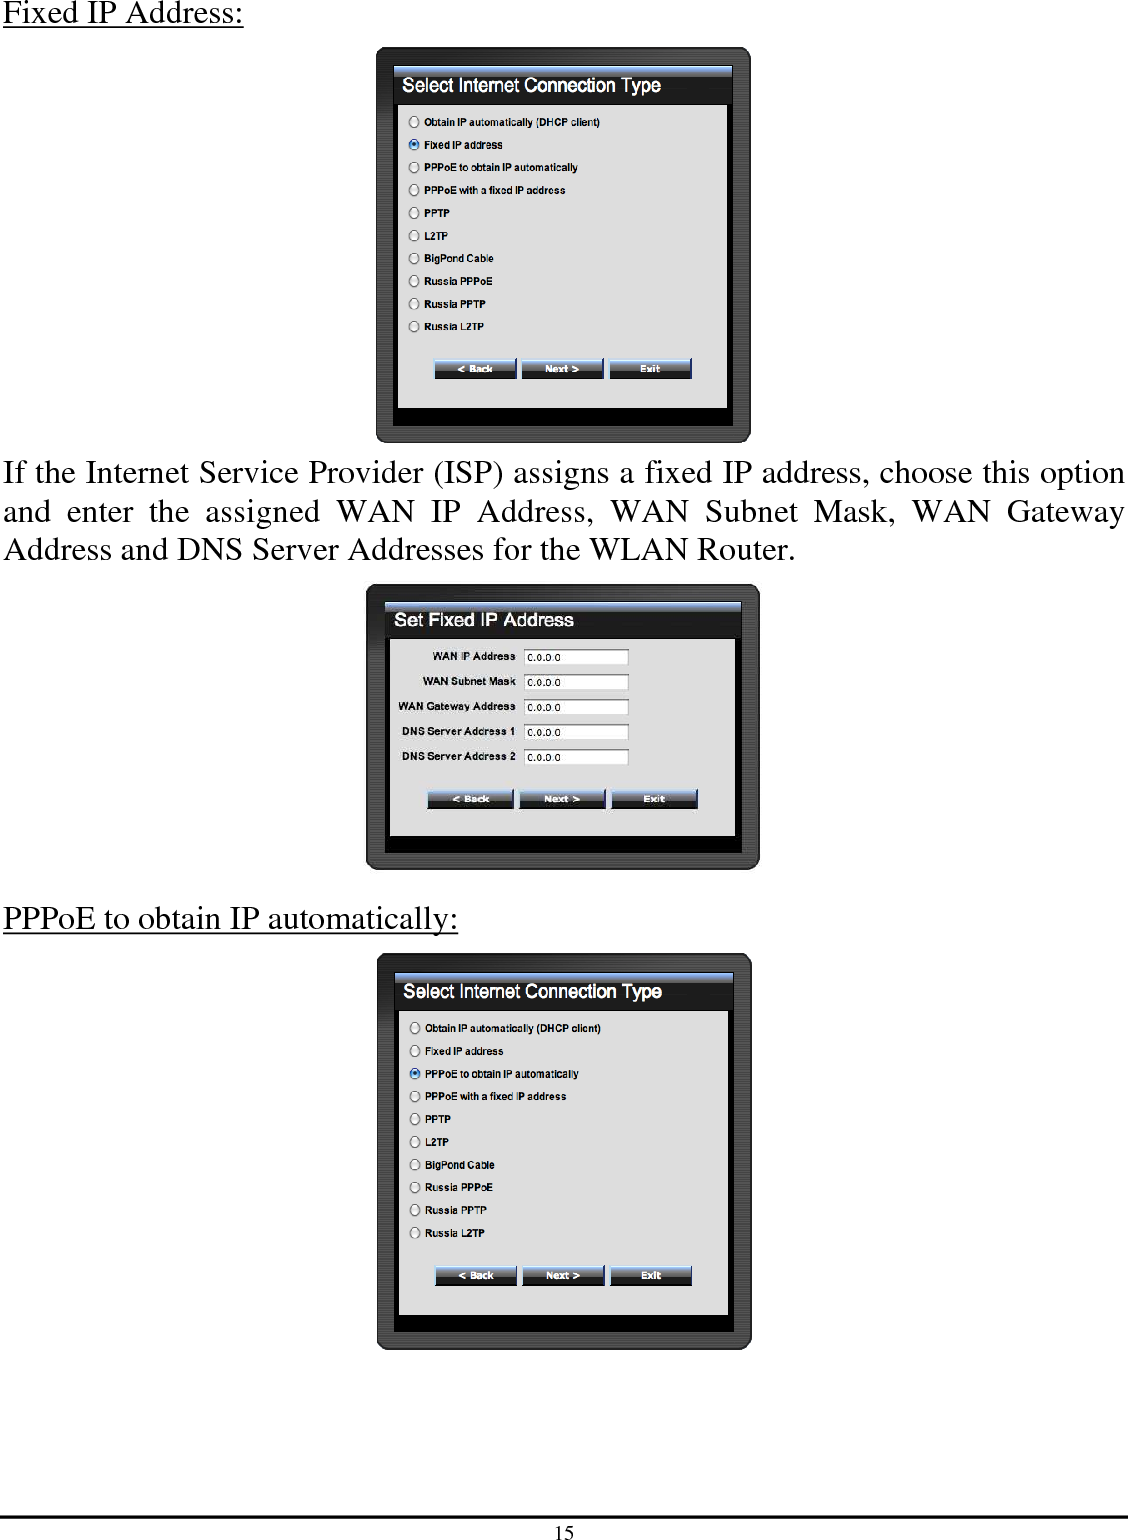 15 Fixed IP Address:  If the Internet Service Provider (ISP) assigns a fixed IP address, choose this option and  enter  the  assigned  WAN  IP  Address,  WAN  Subnet  Mask,  WAN  Gateway Address and DNS Server Addresses for the WLAN Router.  PPPoE to obtain IP automatically:  